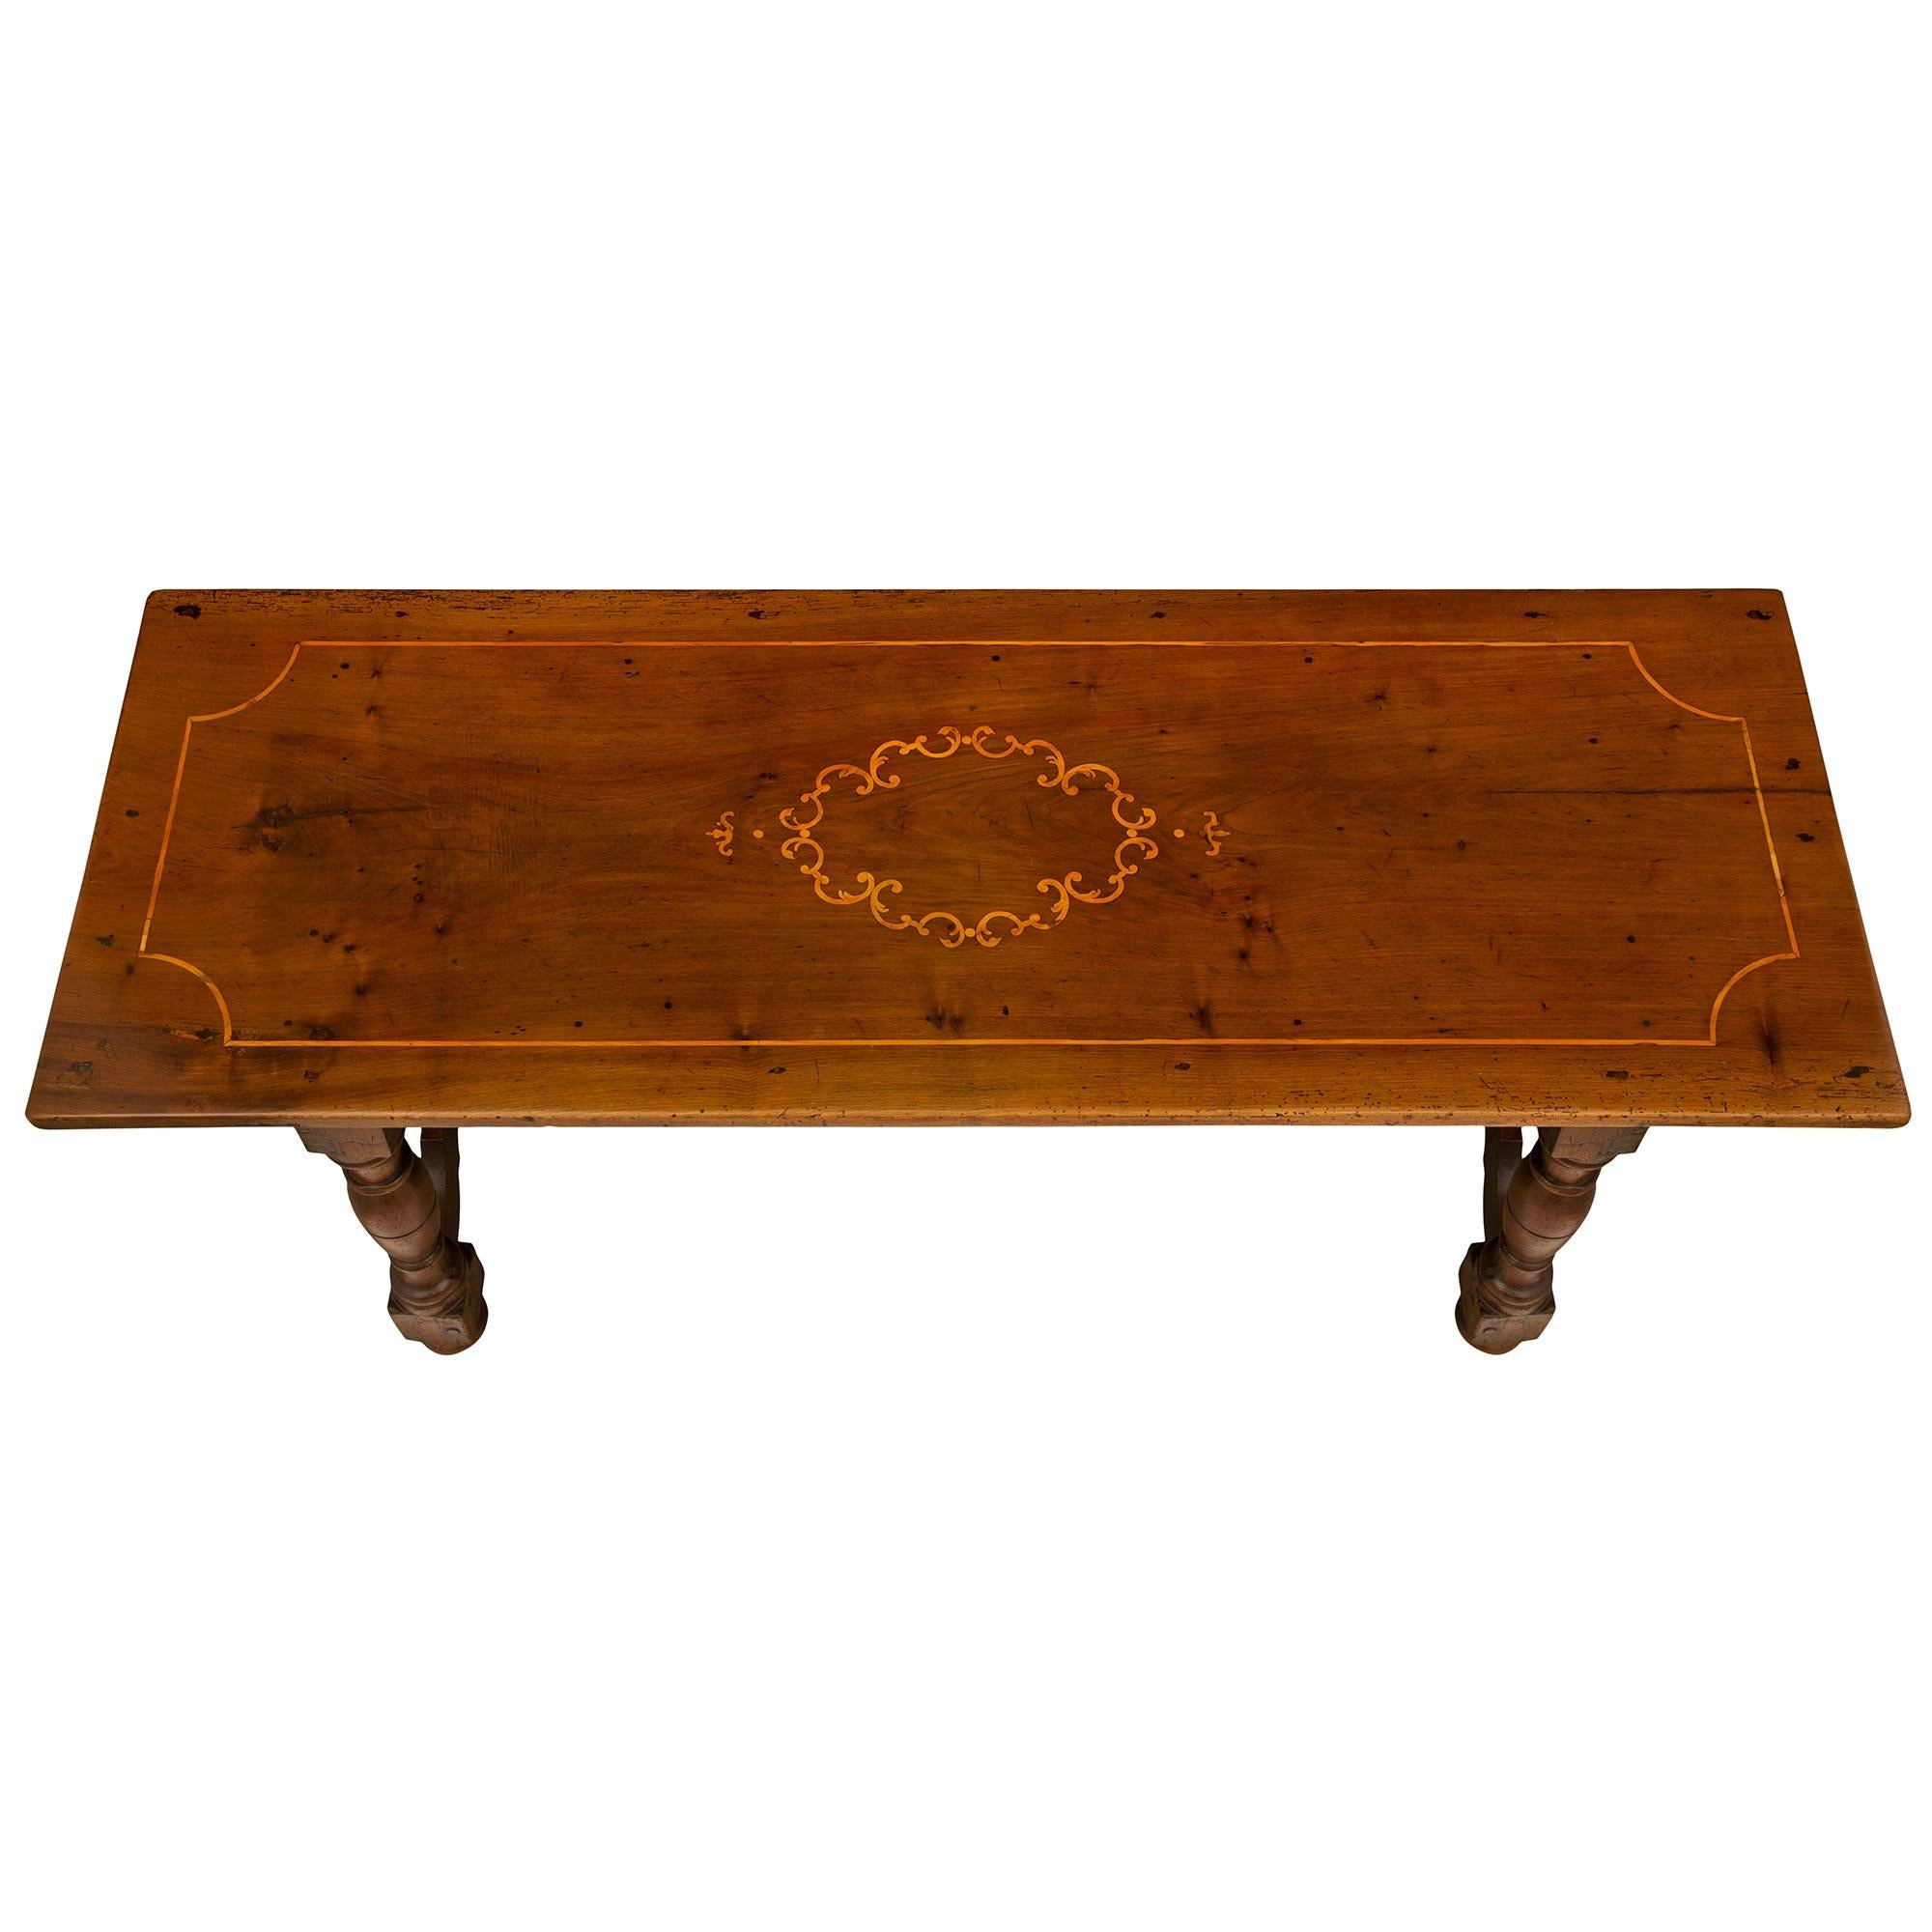 An extremely handsome Italian 18th-century walnut trestle table. The table is raised on four bun feet below turned legs connected by scalloped shaped slanted supports. Above the arbalette shaped frieze is the rectangular solid top decorated with